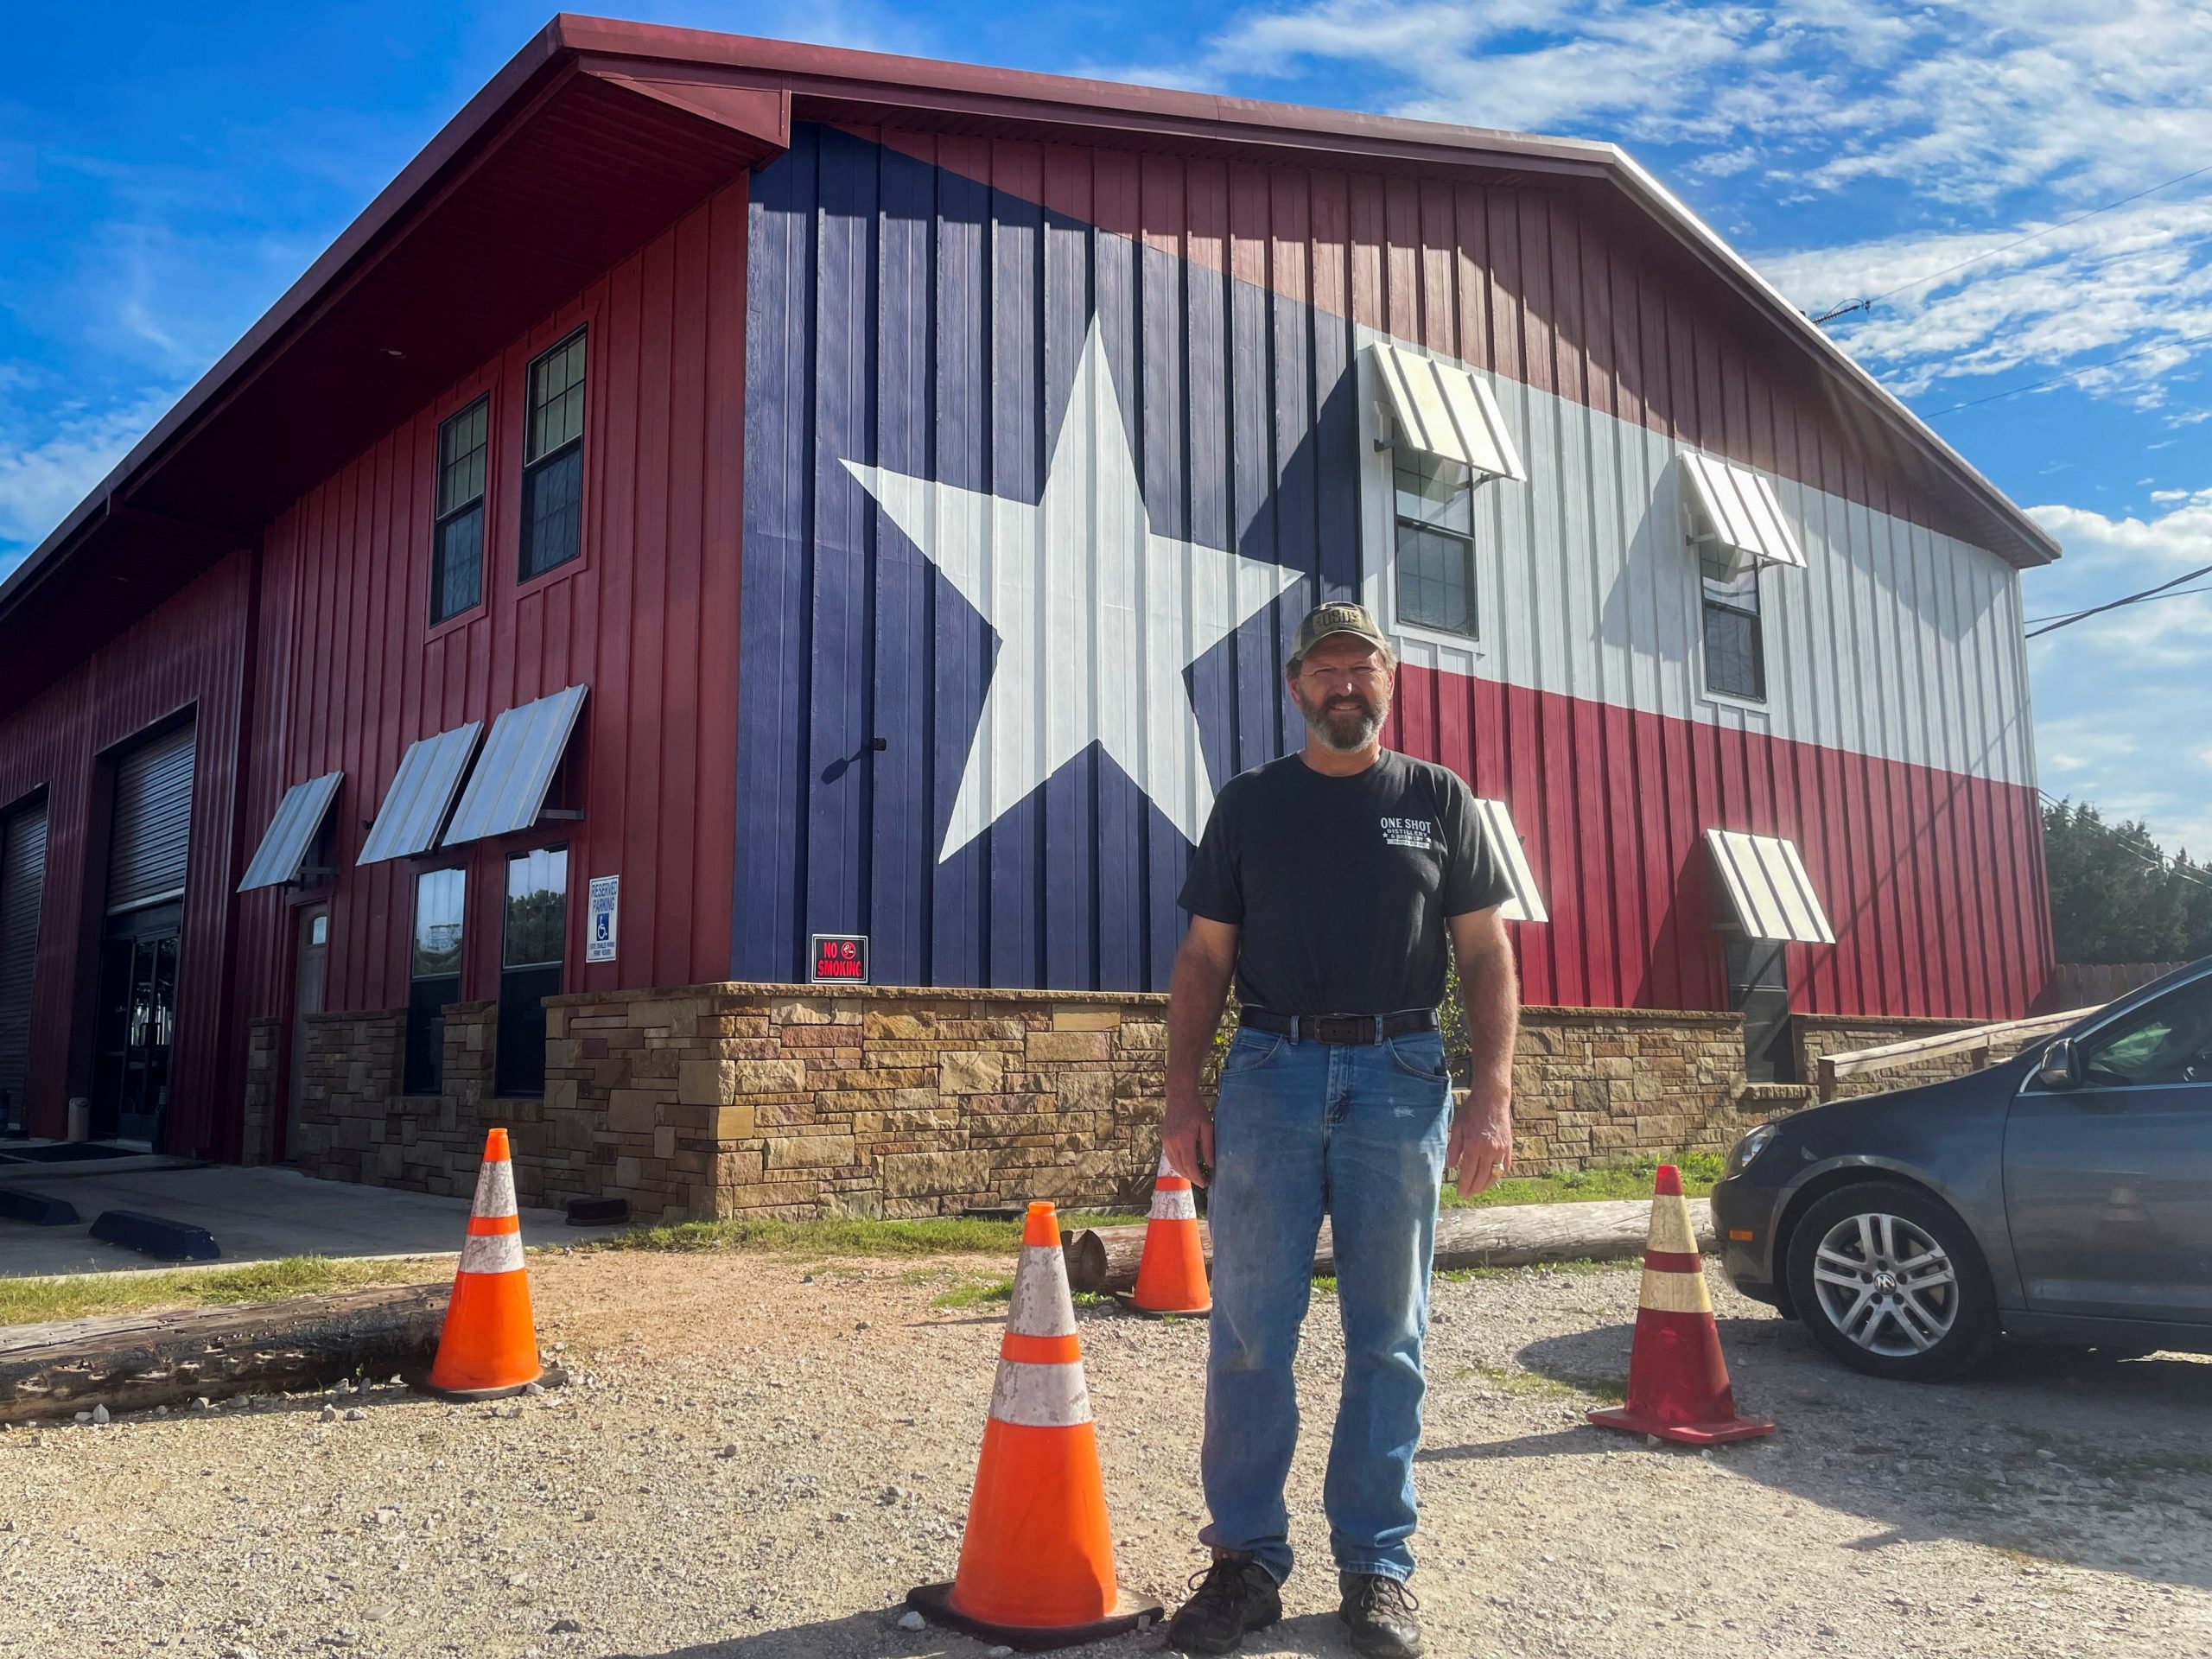 Retired Colonel in the Army Reserves, Phil Waldron, poses for a photo at his distillery, One Shot Distillery and Brewery, in Dripping Springs, Texas, U.S., December 2, 2021.